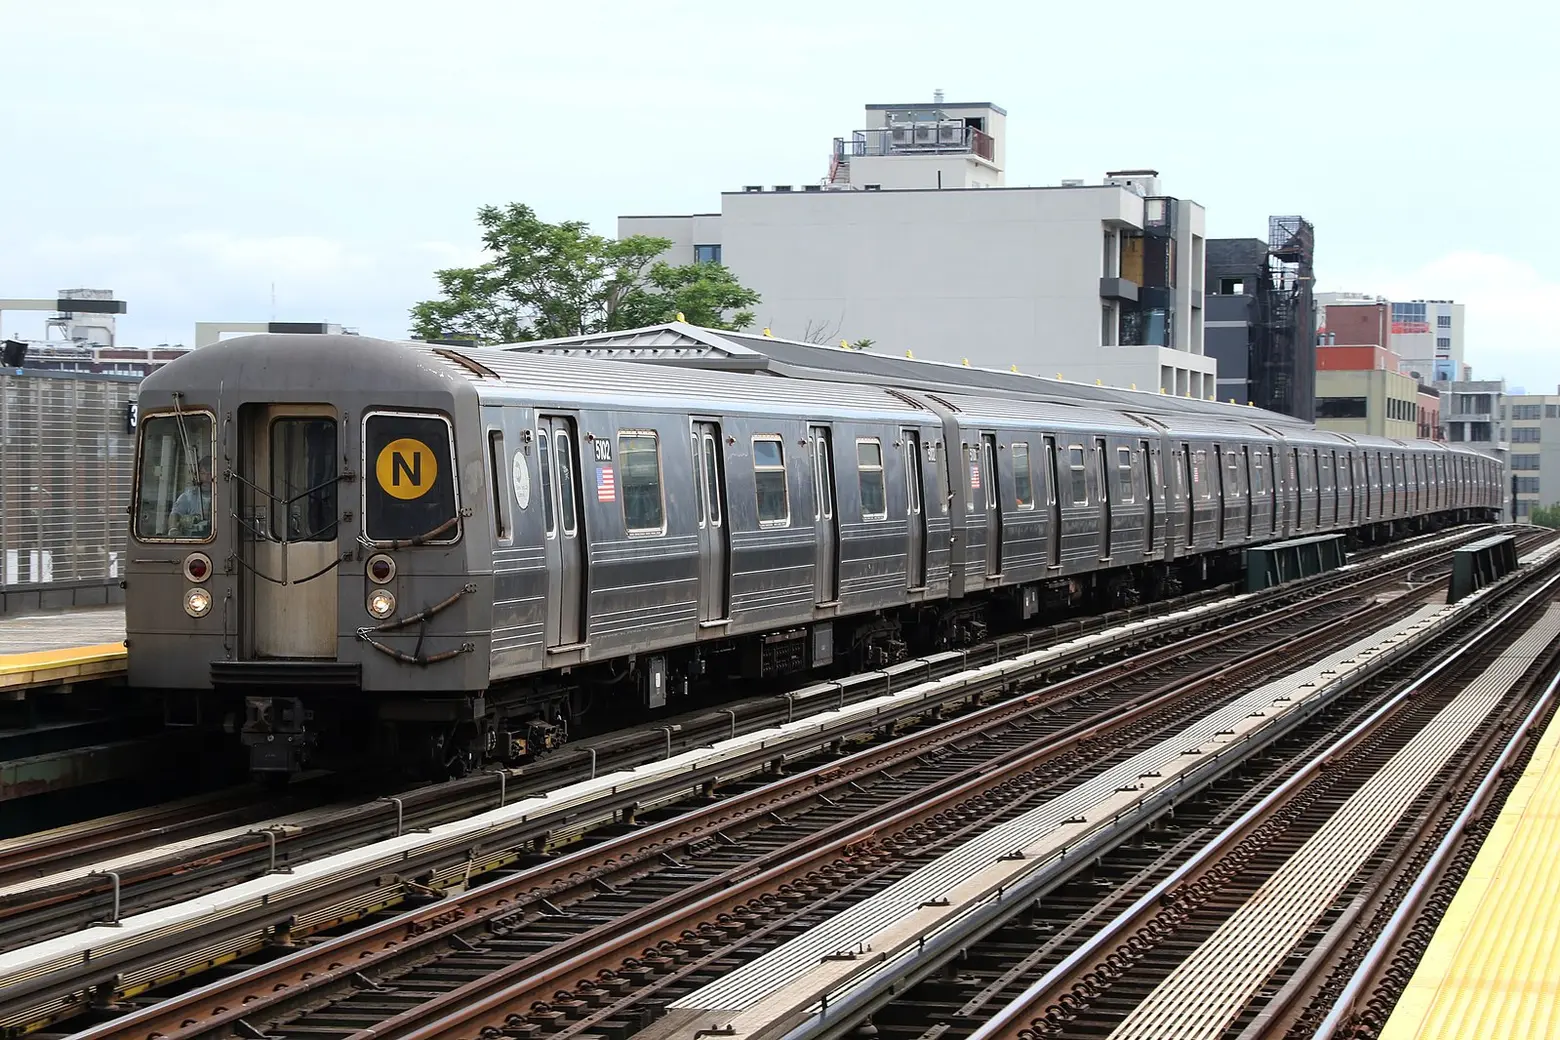 After a four-year renovation project, N train service in Brooklyn is fully restored